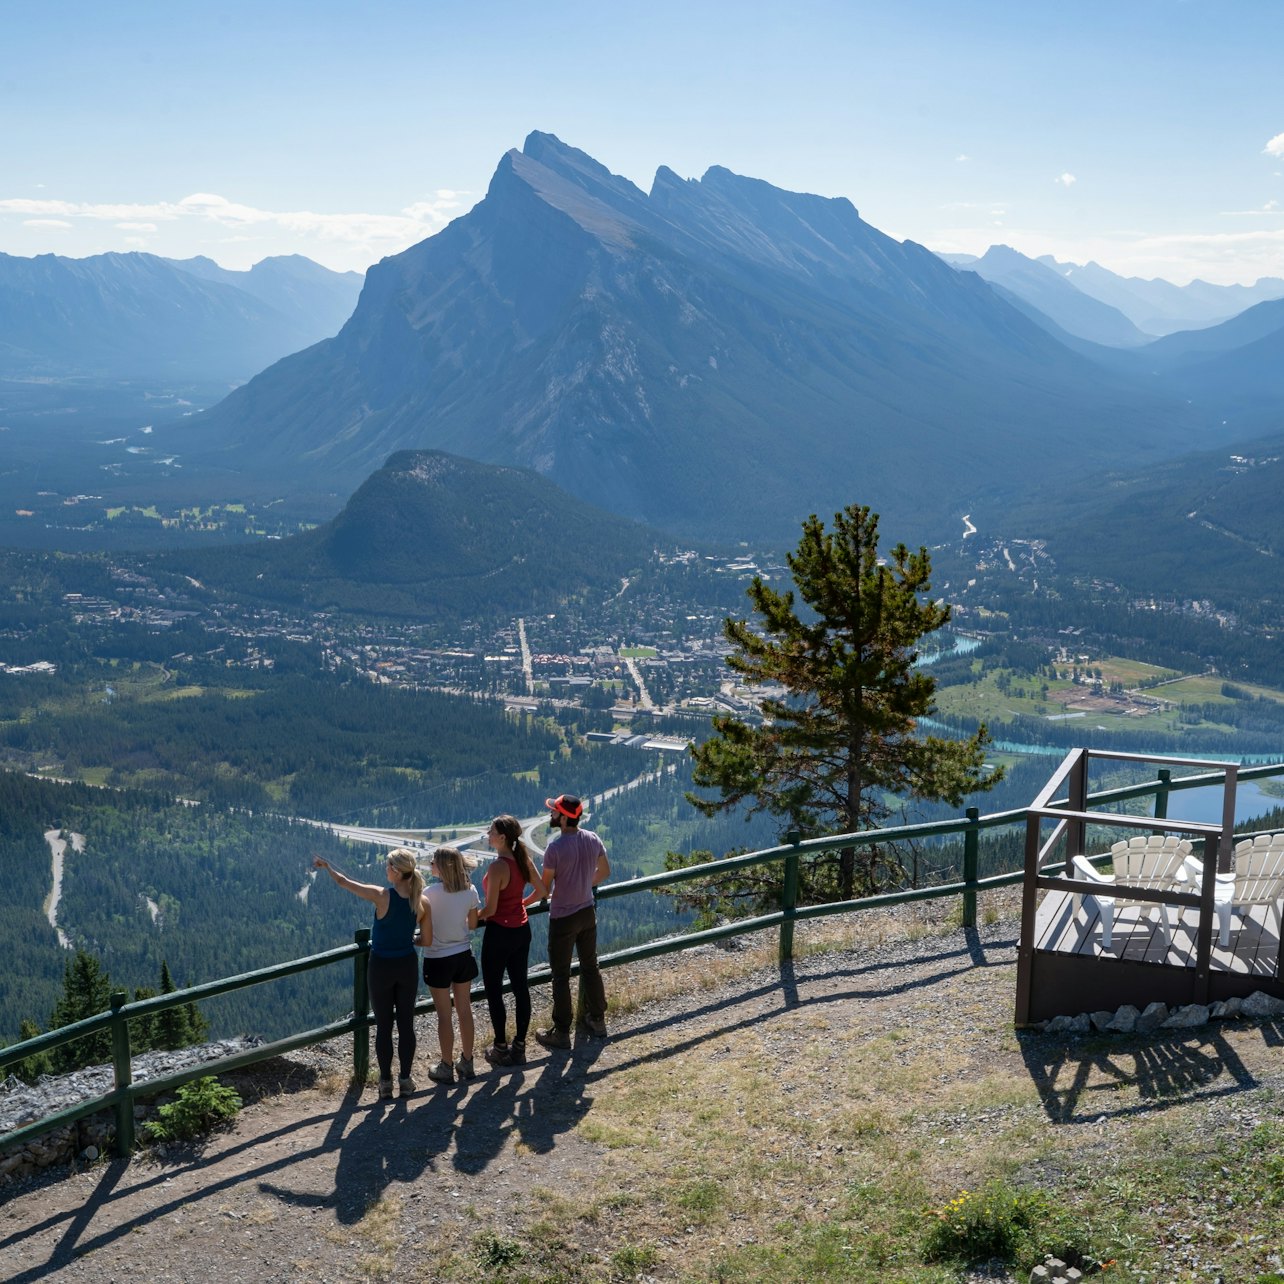 Banff Mount Norquay Sightseeing Chairlift - Accommodations in Banff